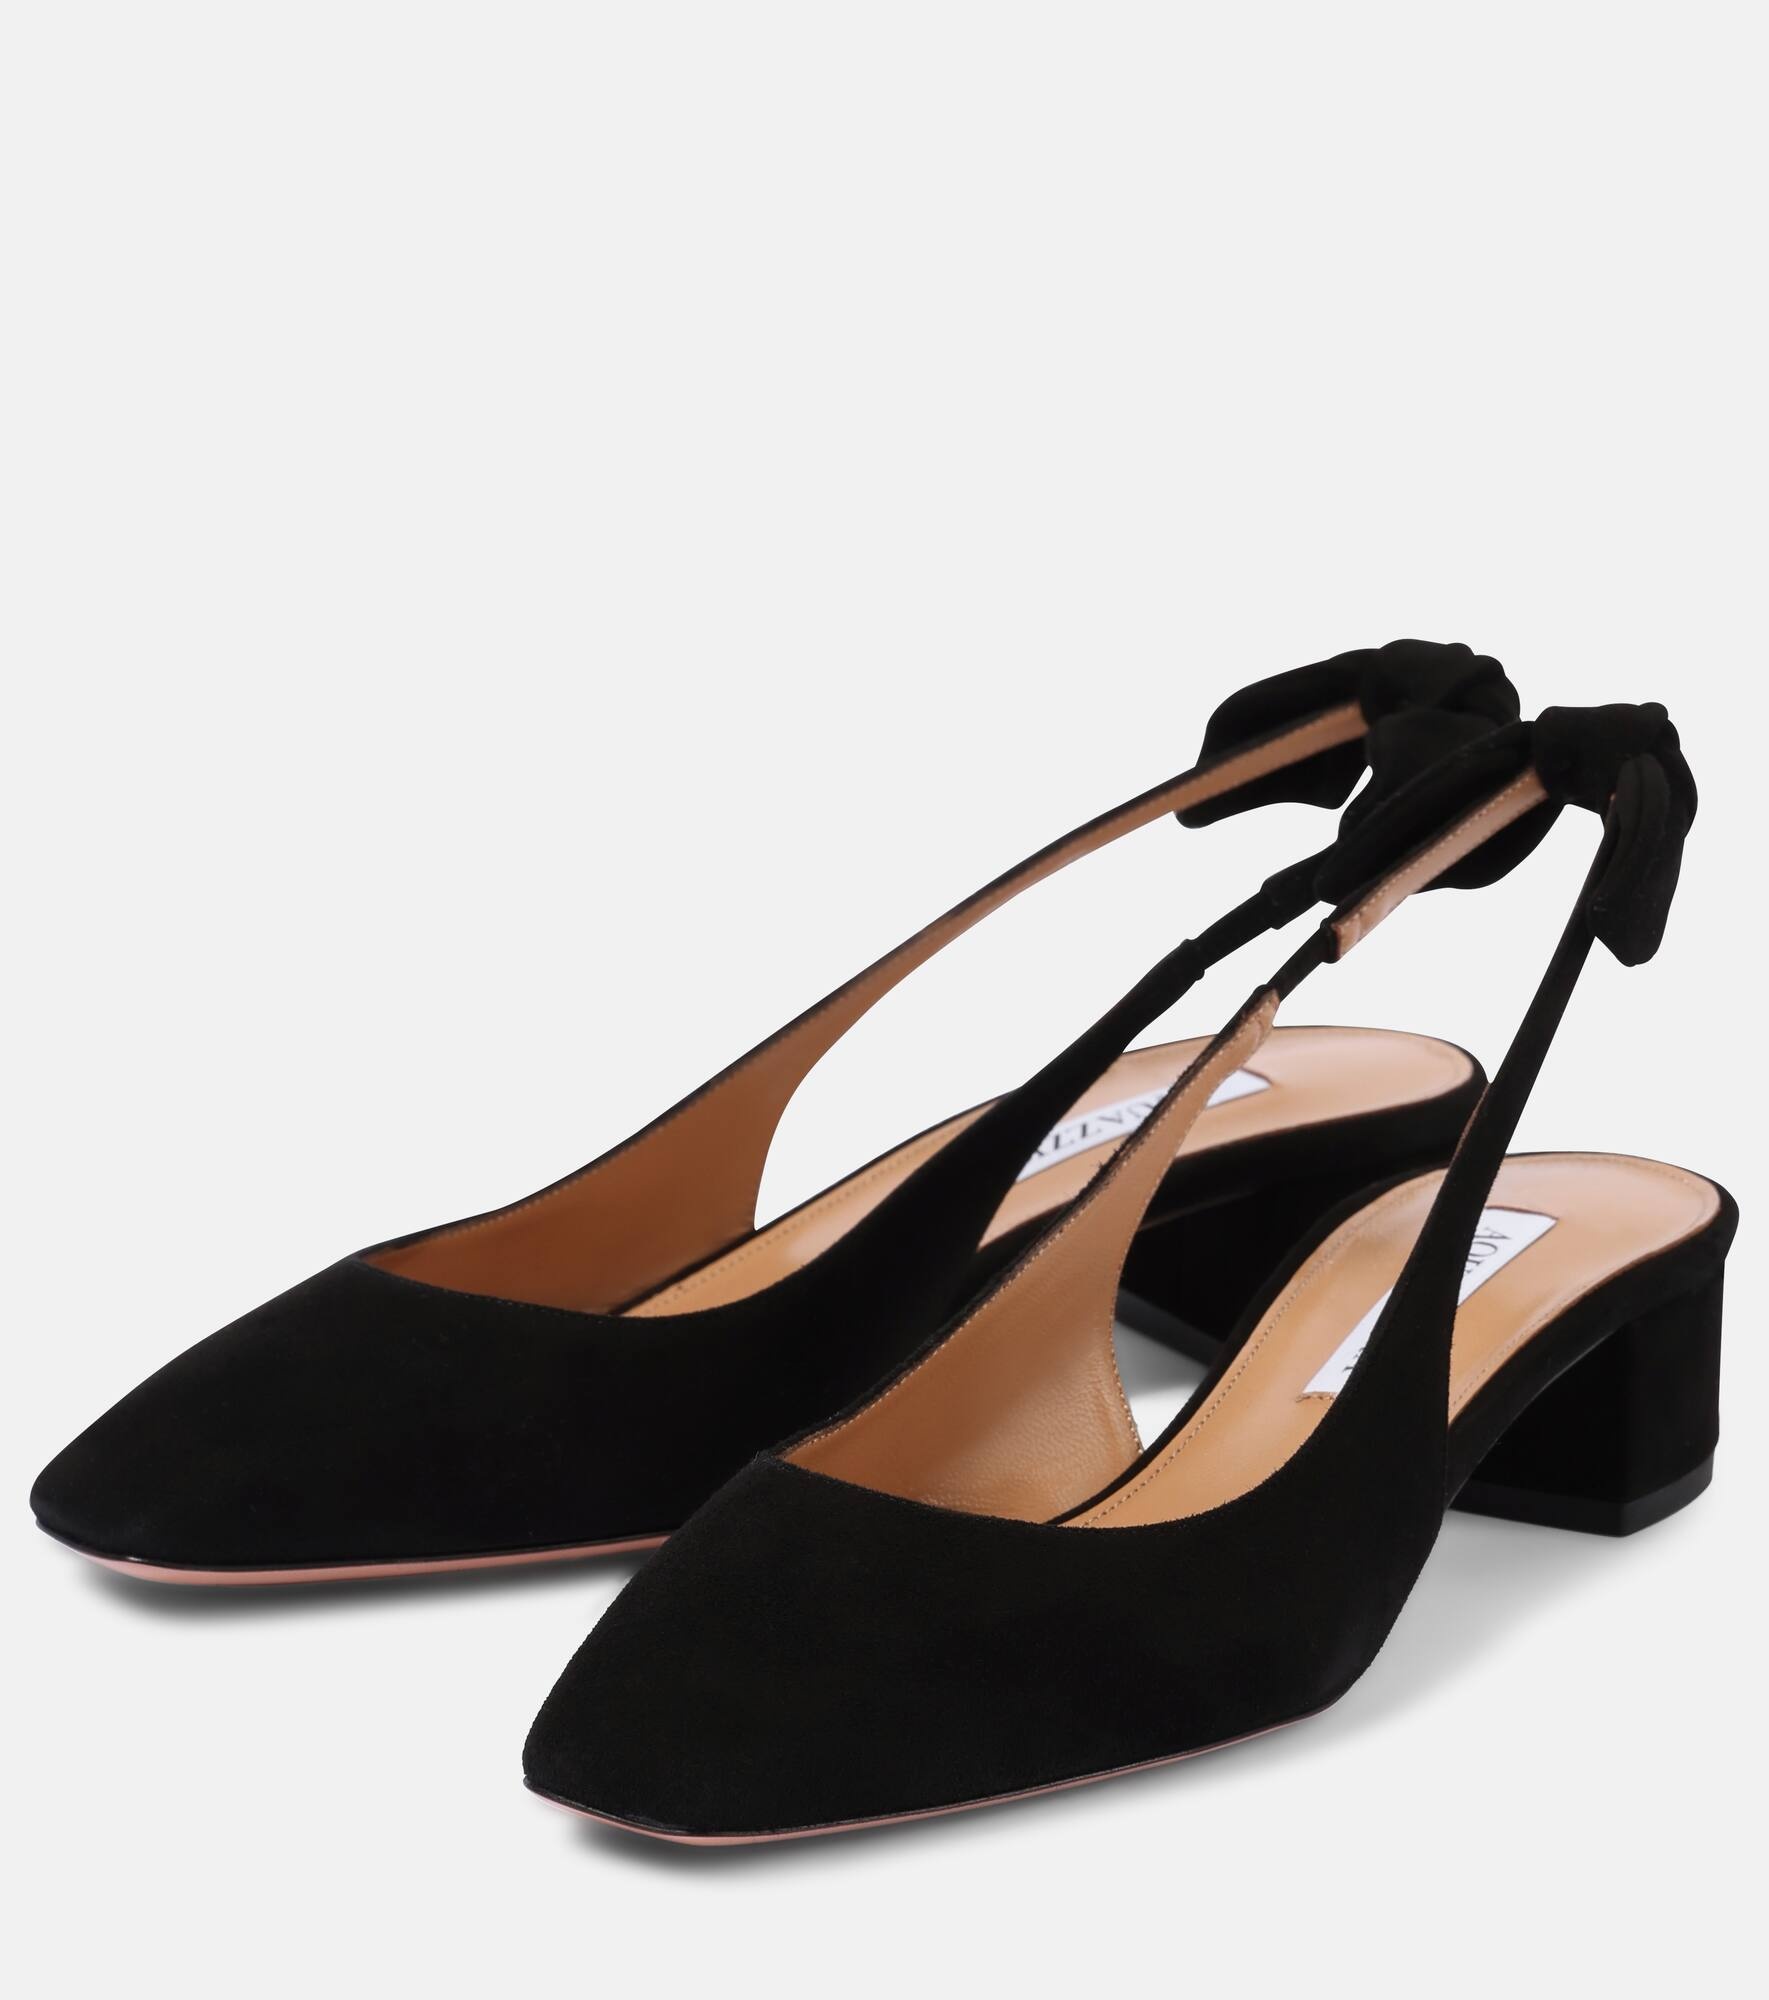 Very Bow 35 suede slingback pumps - 5